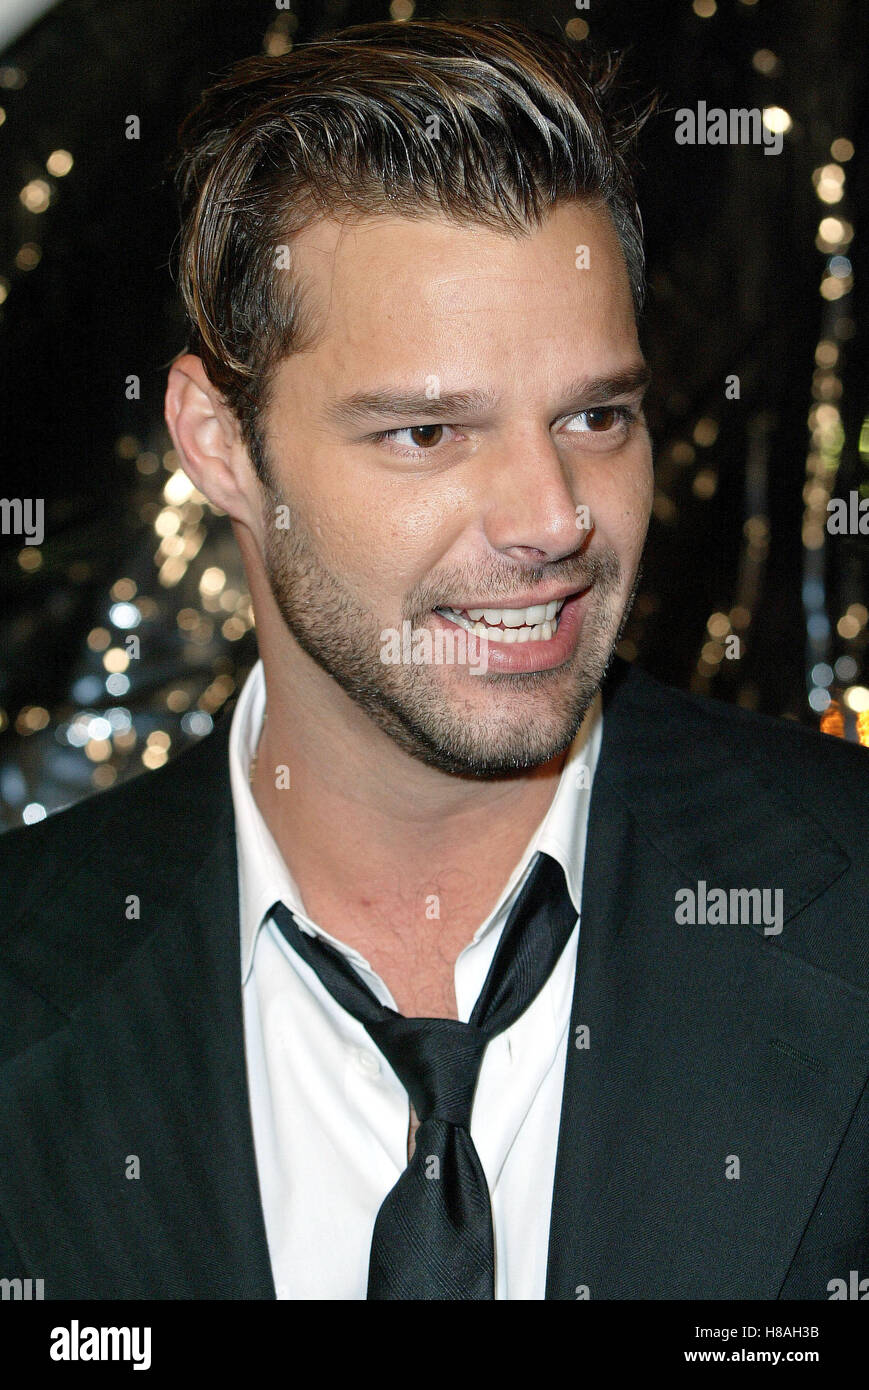 RICKY MARTIN COLD MOUNTAIN PREMIERE LOS ANGELES MANN THEATRE WESTWOOD LOS ANGELES USA 07 December 2003 Stock Photo